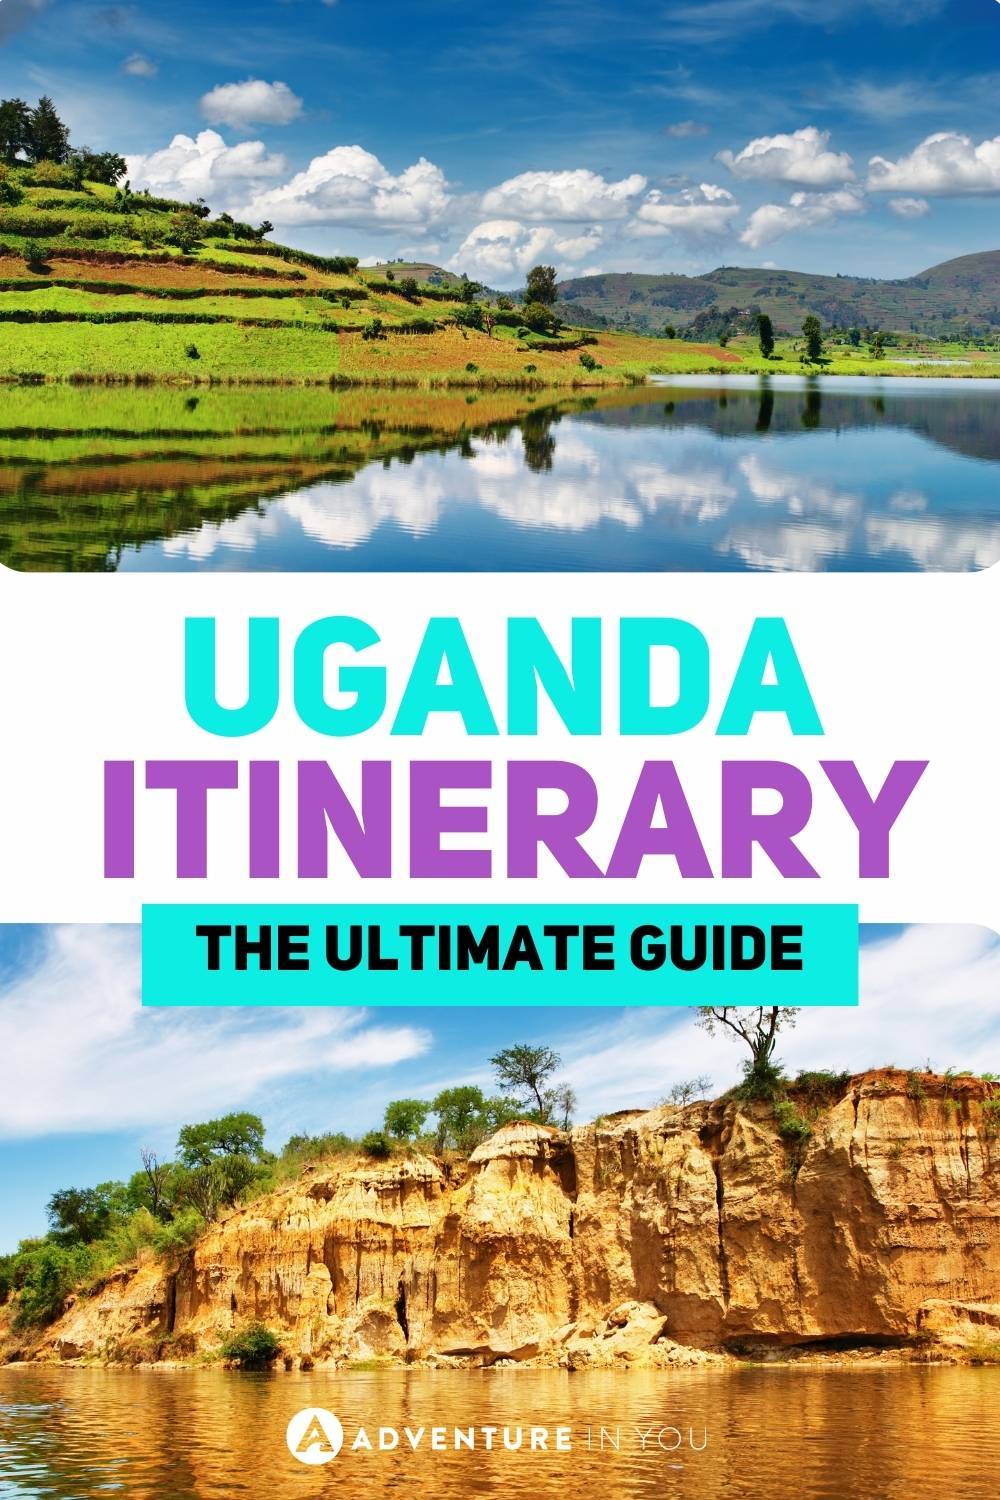 Uganda Itinerary: The Ultimate Guide | Looking for the best Uganda Itinerary? In this article, I walk you through our top recommendations on how to travel and see the best of Uganda. #uganda #safari #ugandaitinerary